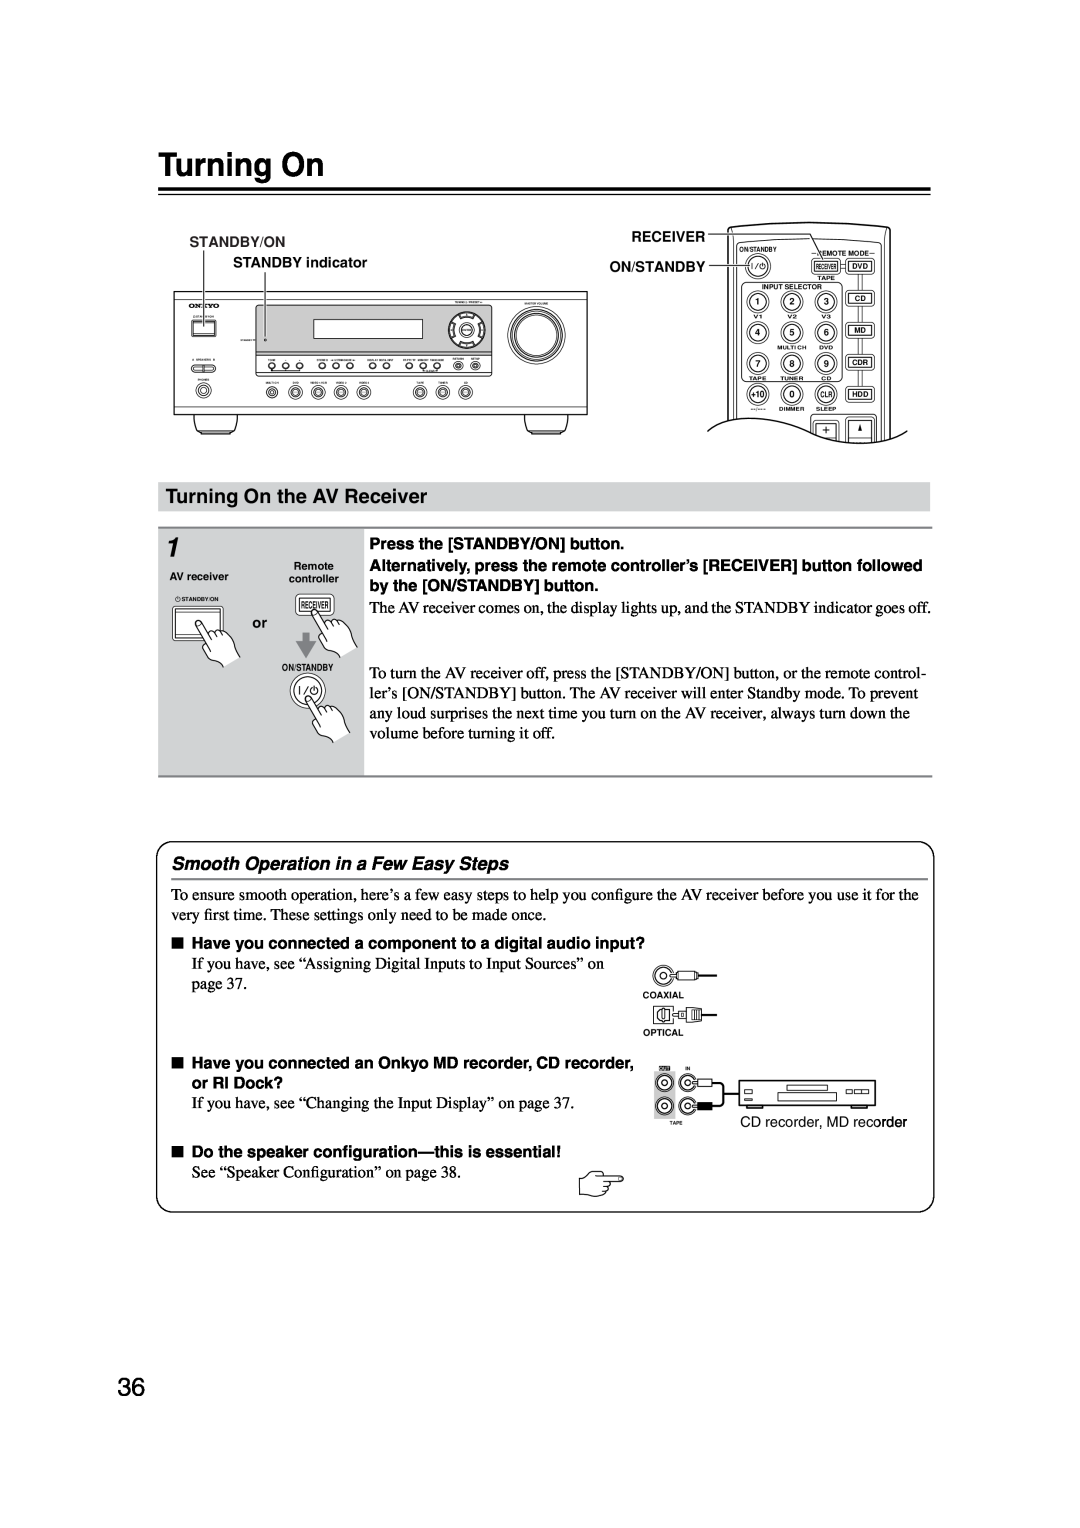 Onkyo HT-S4100 instruction manual Turning On the AV Receiver, Smooth Operation in a Few Easy Steps 